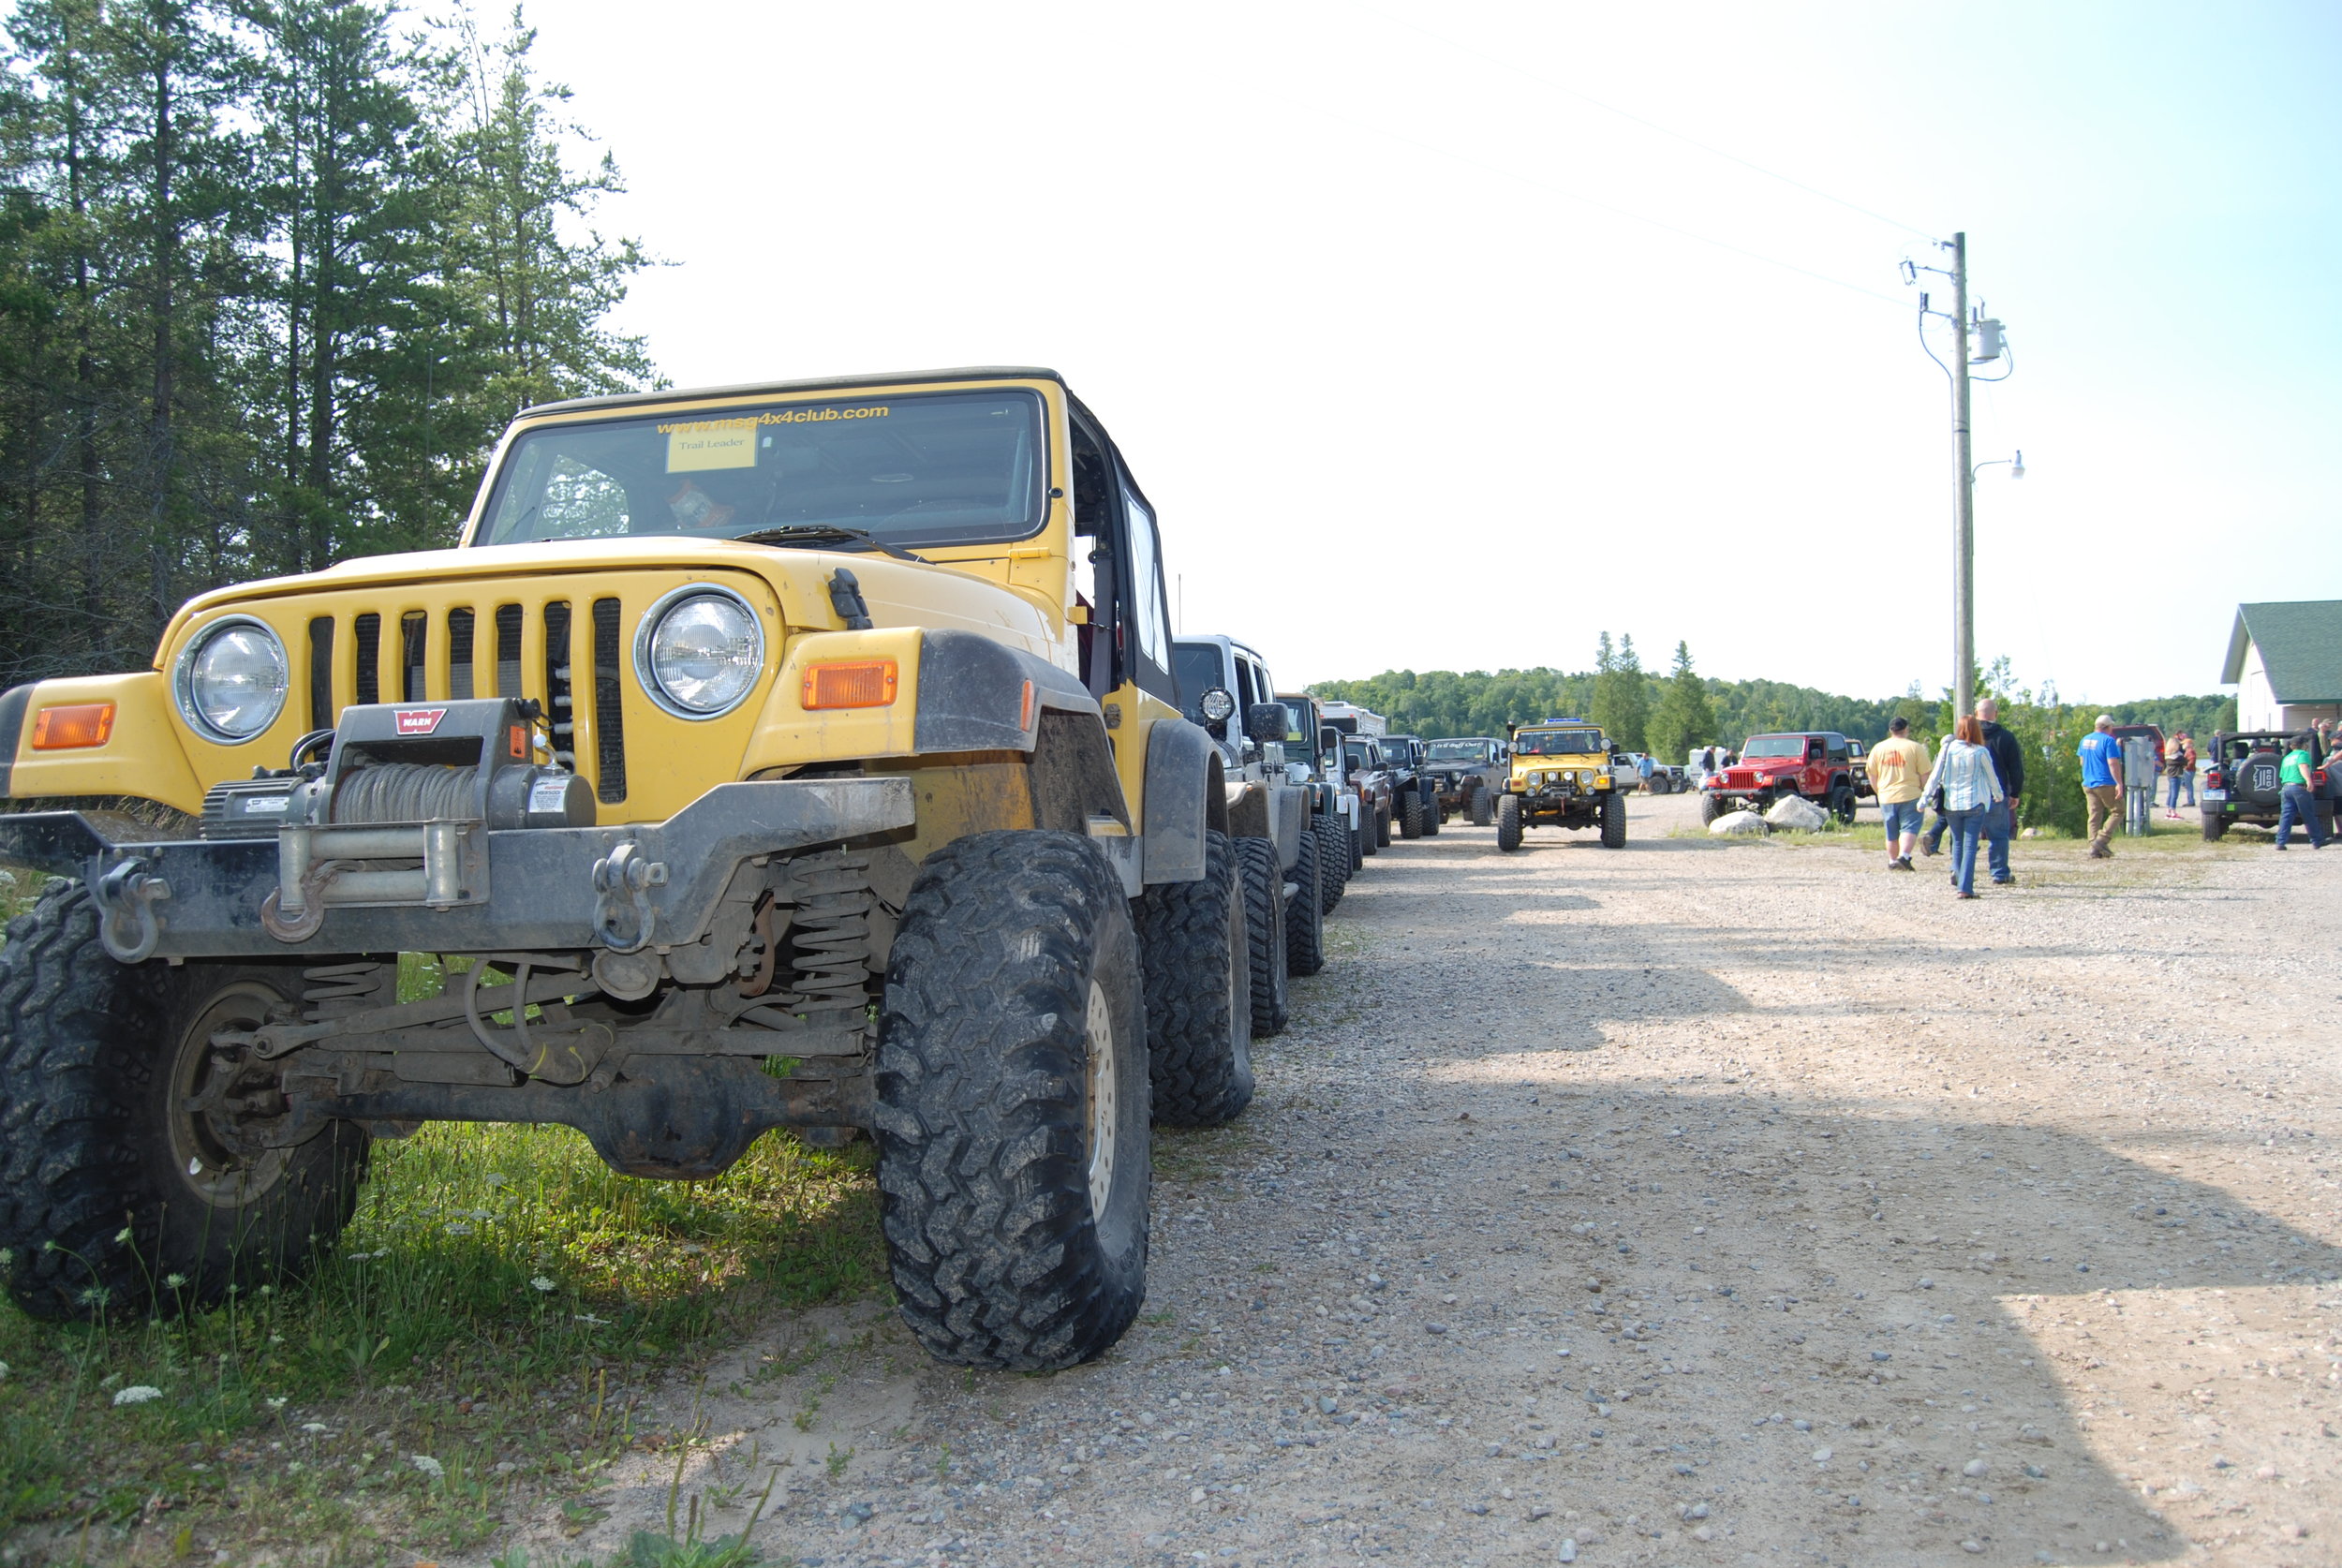   OUR CLUB HOSTS DRUMMOND ISLAND OFFROAD ADVENTURE - A GREAT LAKES FOUR WHEEL DRIVE SANCITIONED EVENT - ANNUALLY IN AUGUST.    TRAILHEAD CAMPGROUND - LINING UP FOR DRUMMOND ISLAND OFFROAD ADVENTURE IN AUGUST OF 2014.  